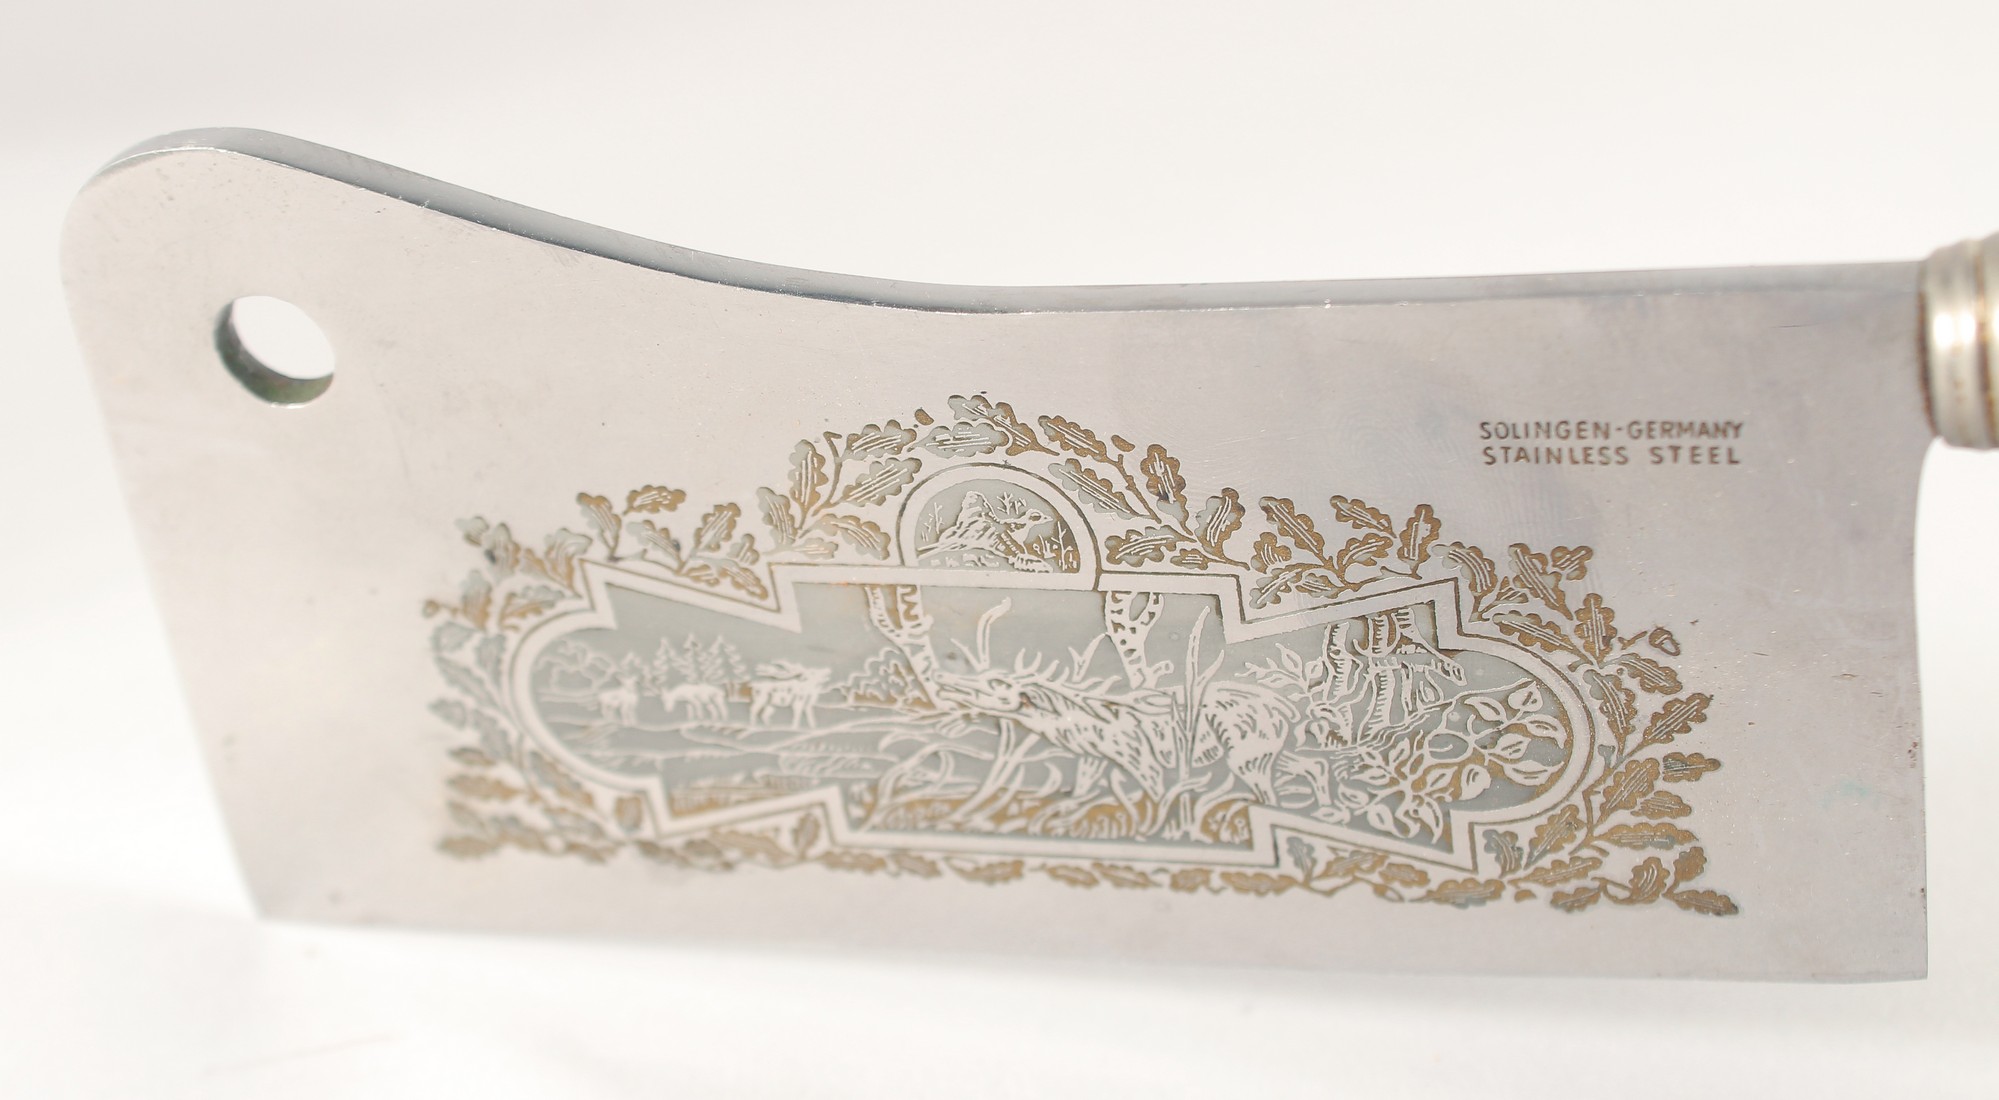 A SOLINGEN STAINLESS STEAL CLEAVER, the blade engraved with a deer, with an antler handle, 10.5" - Image 2 of 3